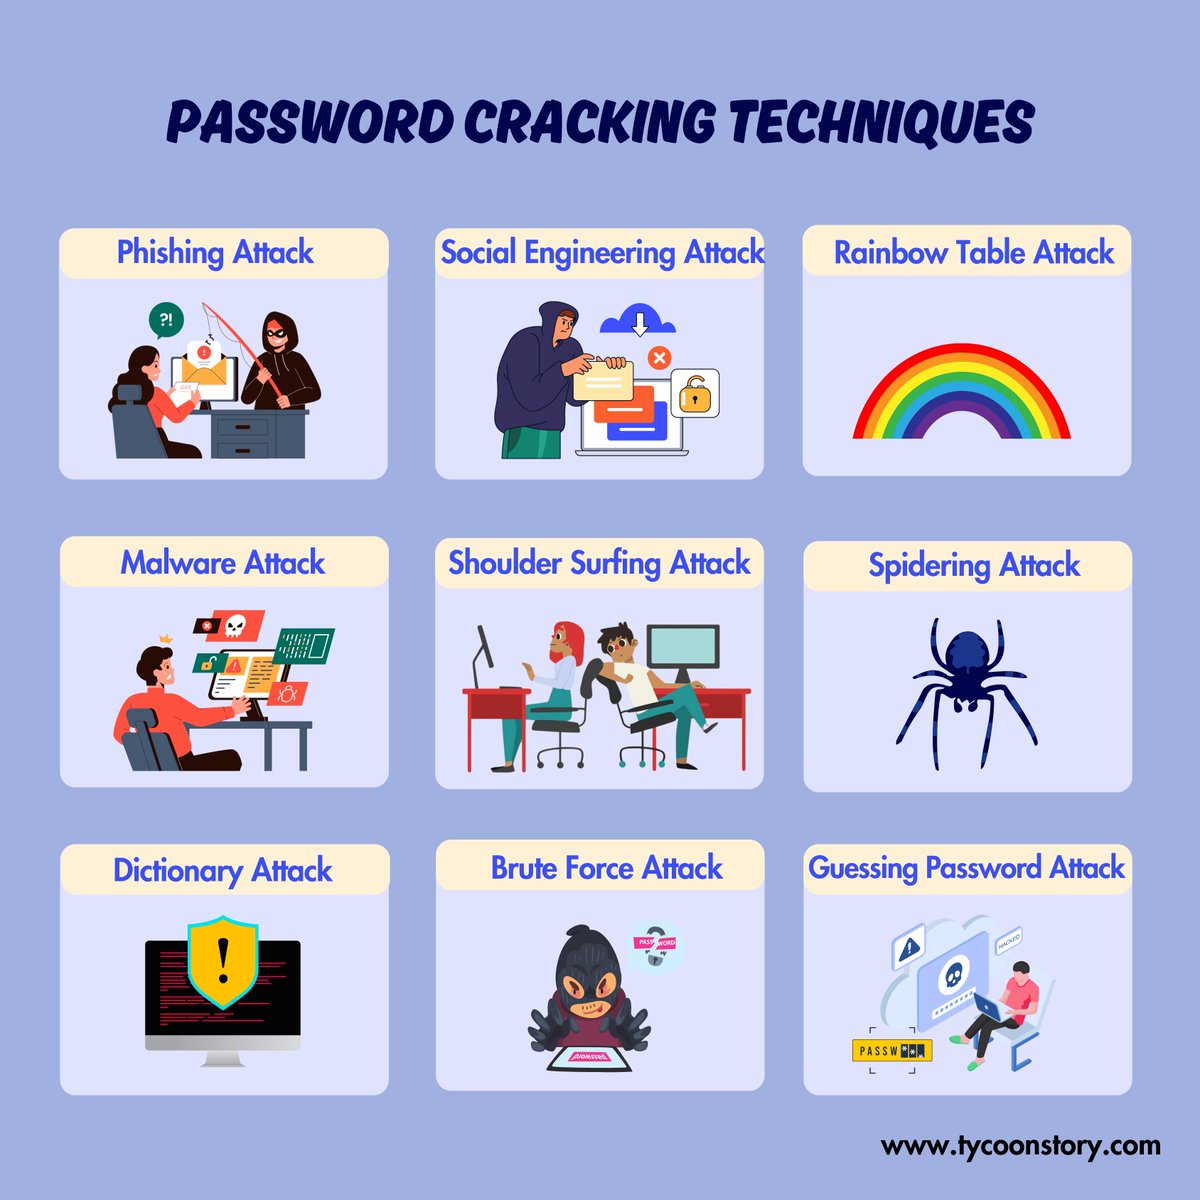 𝐏𝐚𝐬𝐬𝐰𝐨𝐫𝐝 𝐂𝐫𝐚𝐜𝐤𝐢𝐧𝐠 𝐓𝐞𝐜𝐡𝐧𝐢𝐪𝐮𝐞𝐬

#PasswordSecurity #CyberSecurity #DataPrivacy 
#PhishingAttack #SocialEngineering #Malware 
#DigitalSecurity #OnlineSafety @TycoonStoryCo  @tycoonstory2020 @privacy_data 

tycoonstory.com